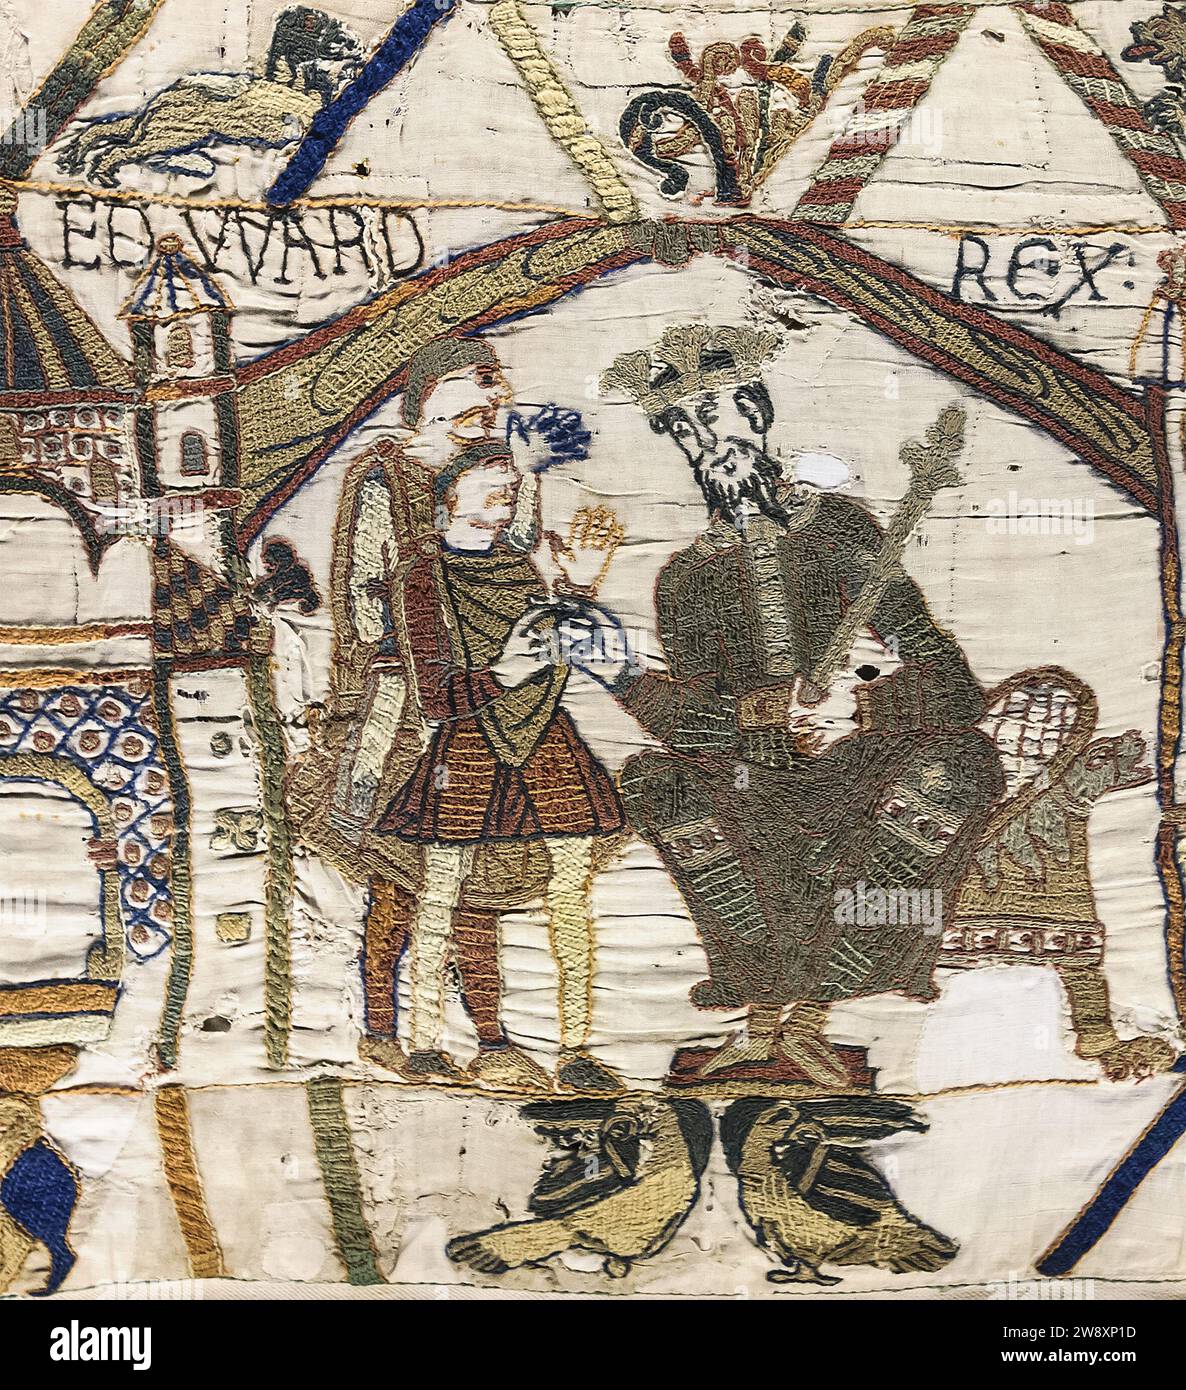 Edward the Confessor, enthroned in the opening scene of the Bayeux Tapestry with Harold Godwinson. Illustration of the Anglo-Saxon English king and saint, Edward the Confessor (c. 1003 - 1066). He was the last king of the House of Wessex. Stock Photo